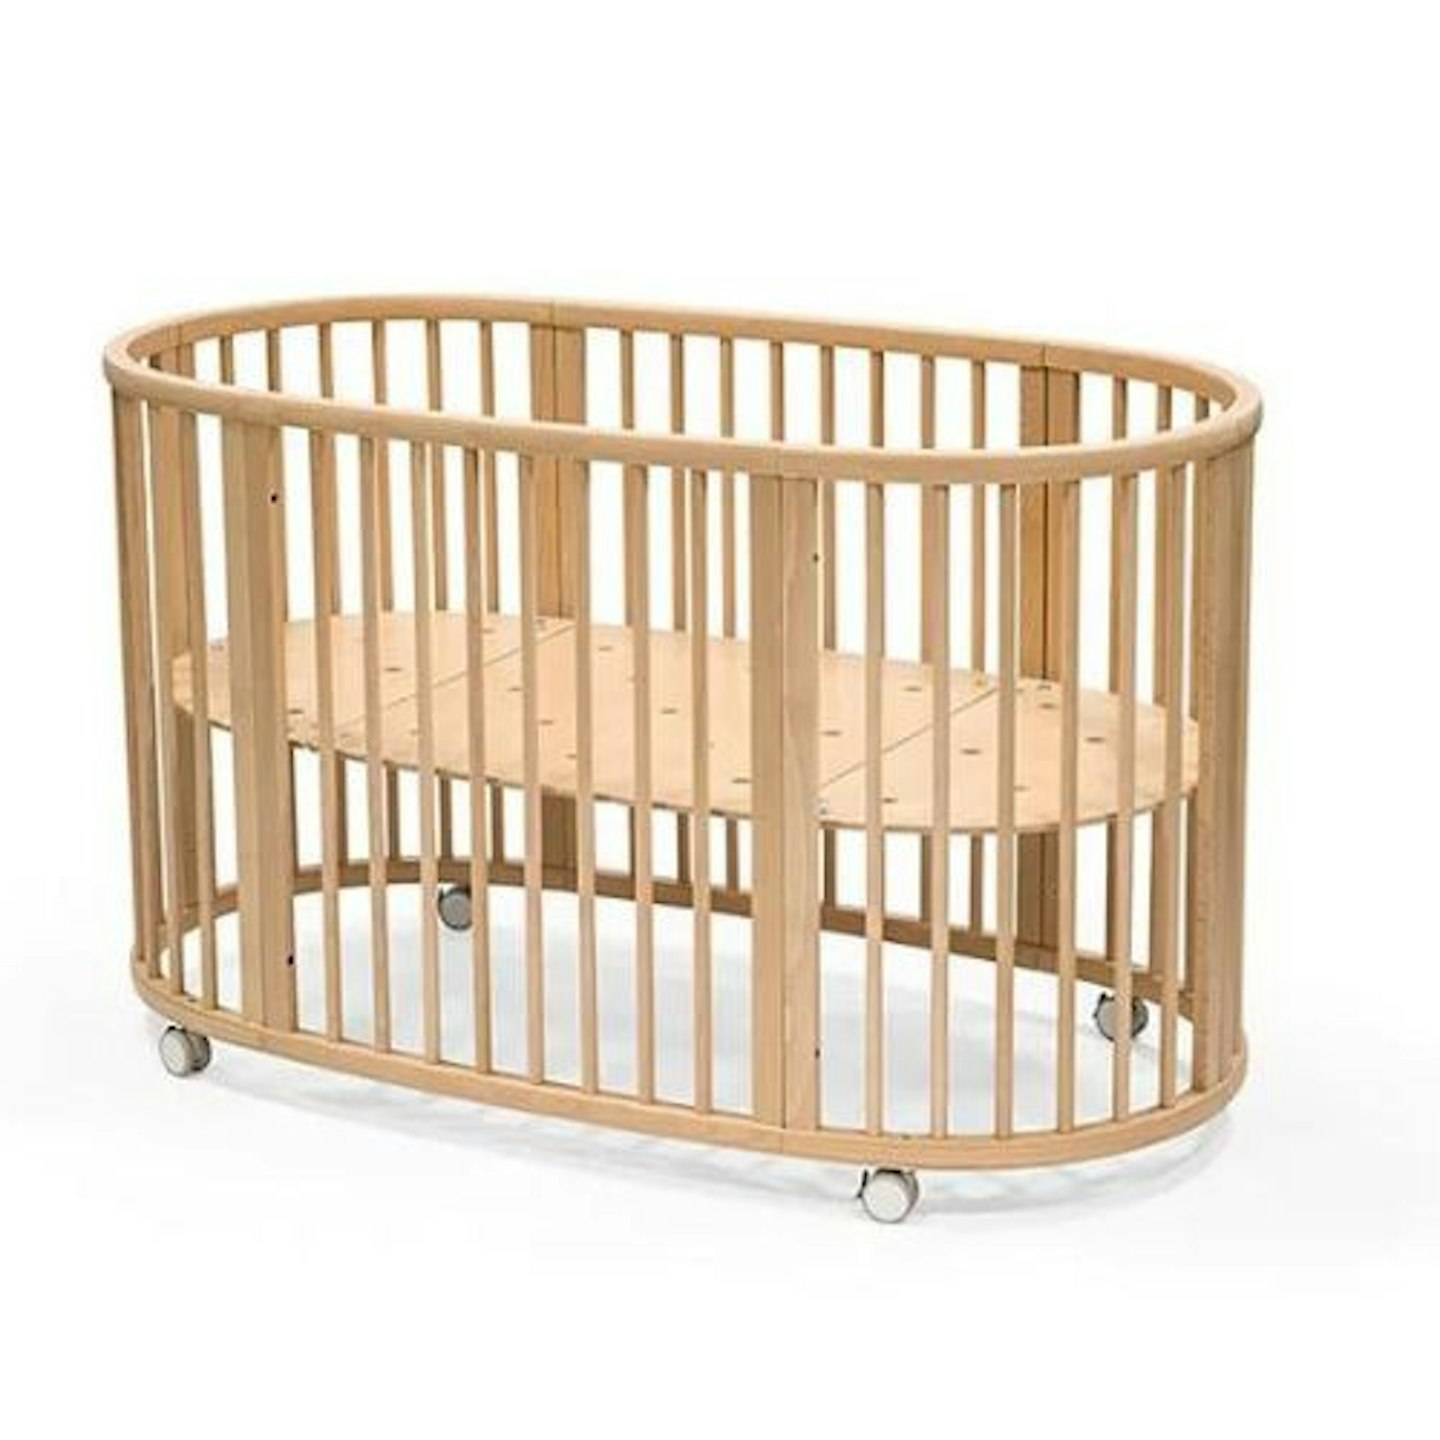 Best Cot Beds and Cots : Stokke Sleepi Oval Crib